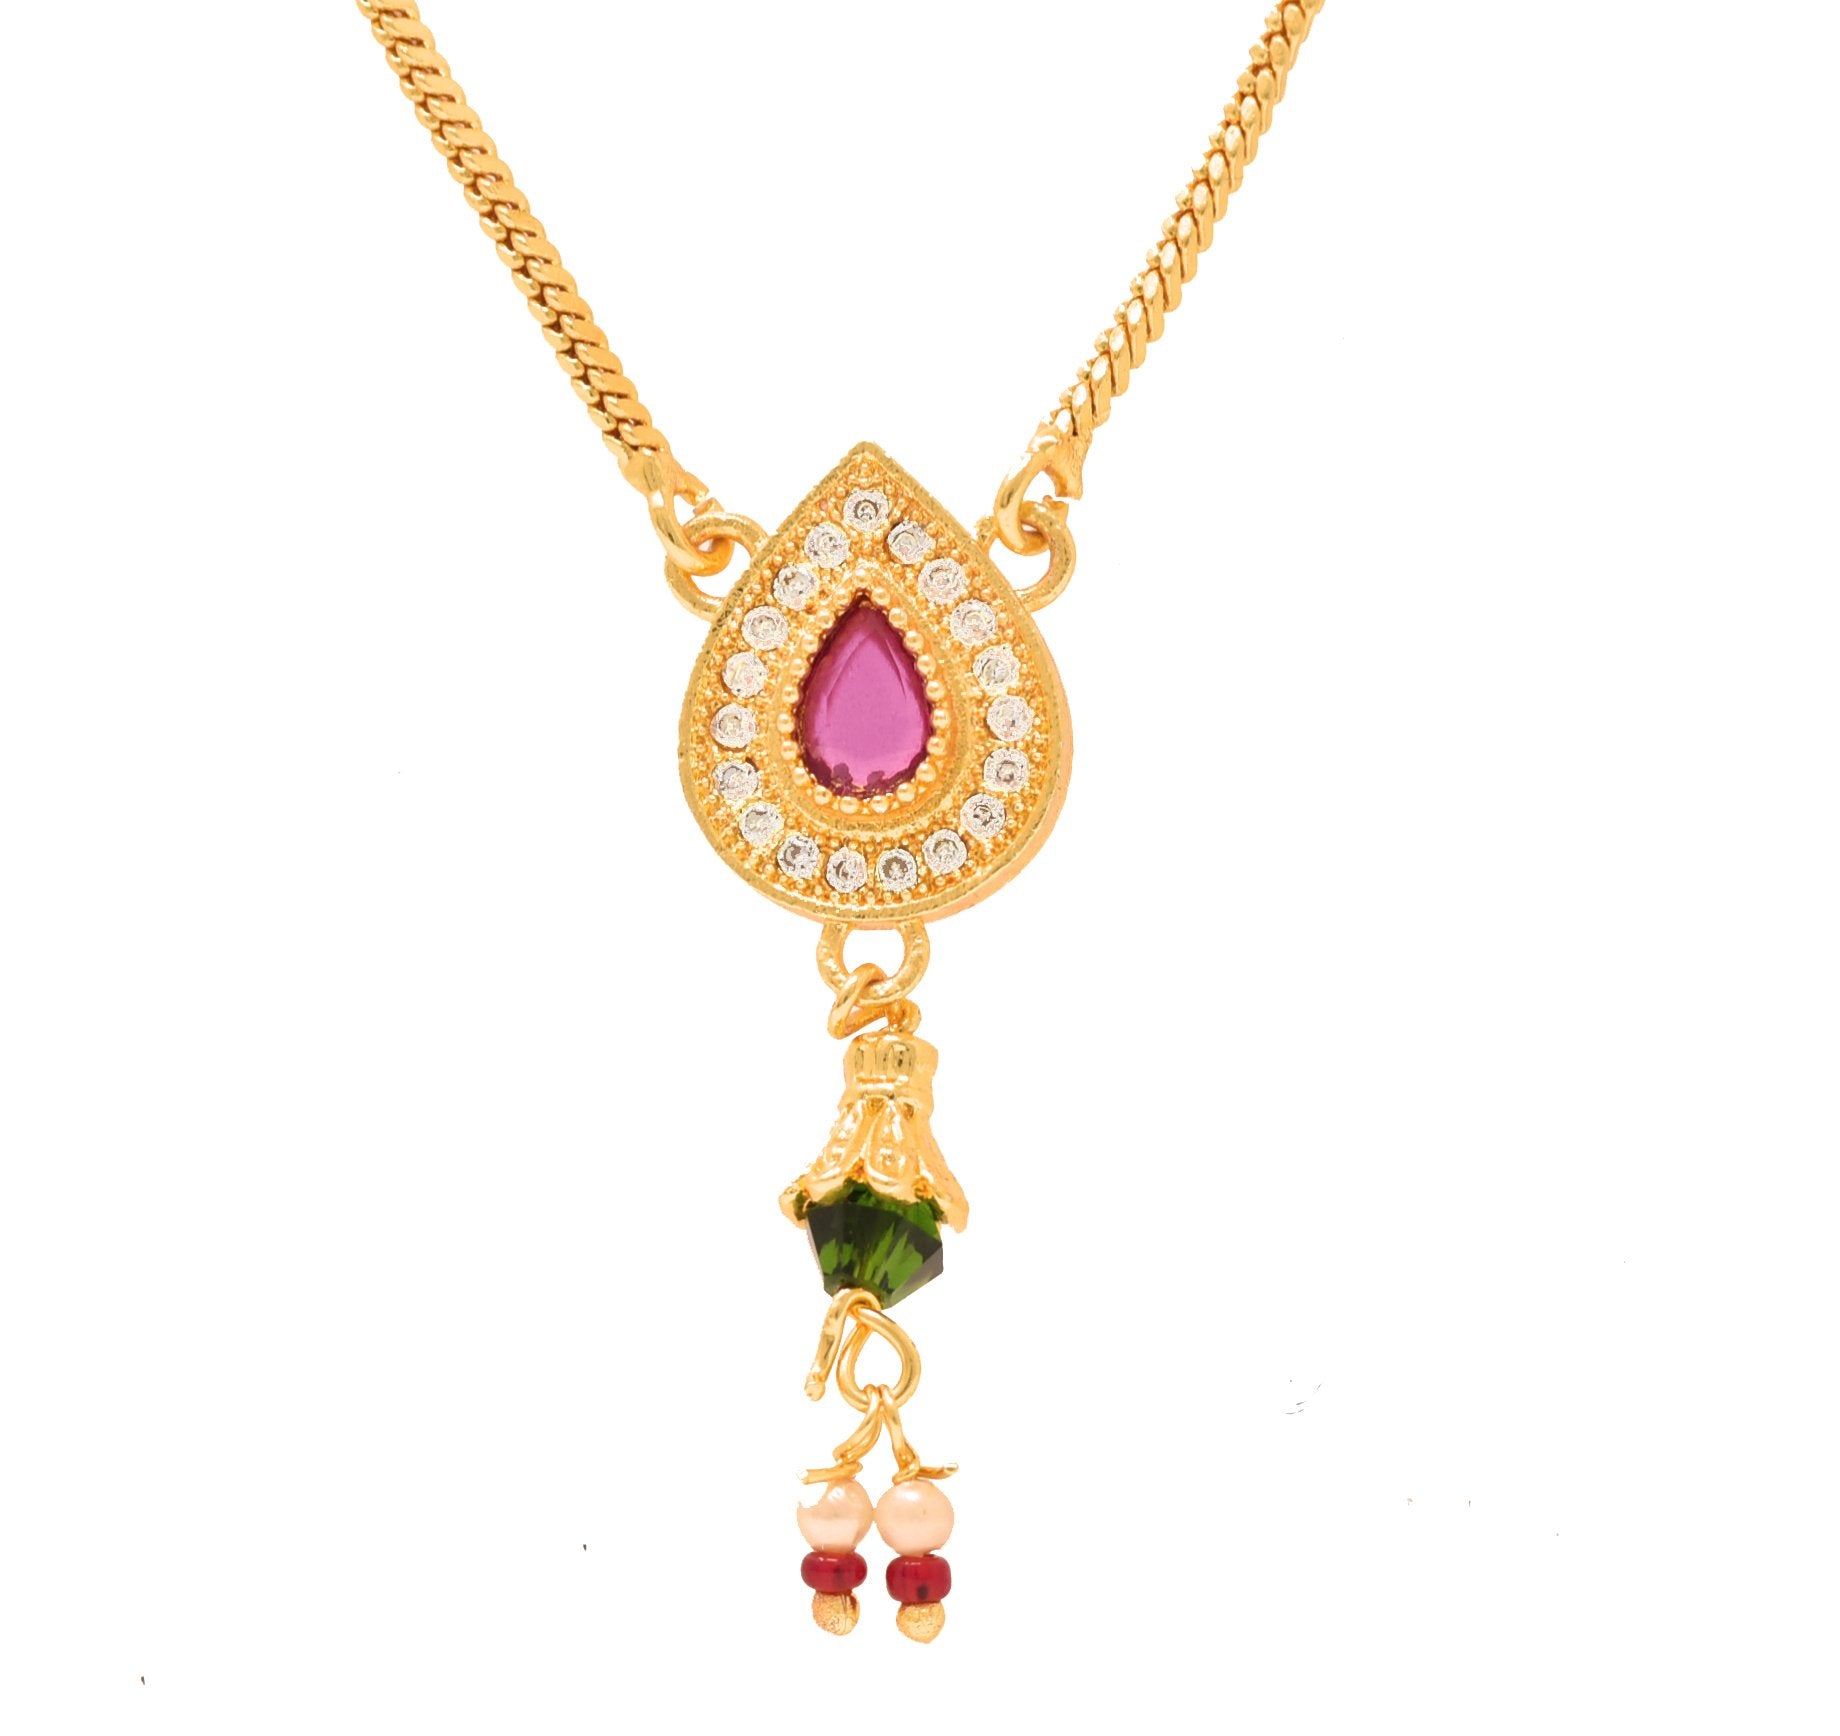 Fashionable Gold Plated Delicate Neckpiece